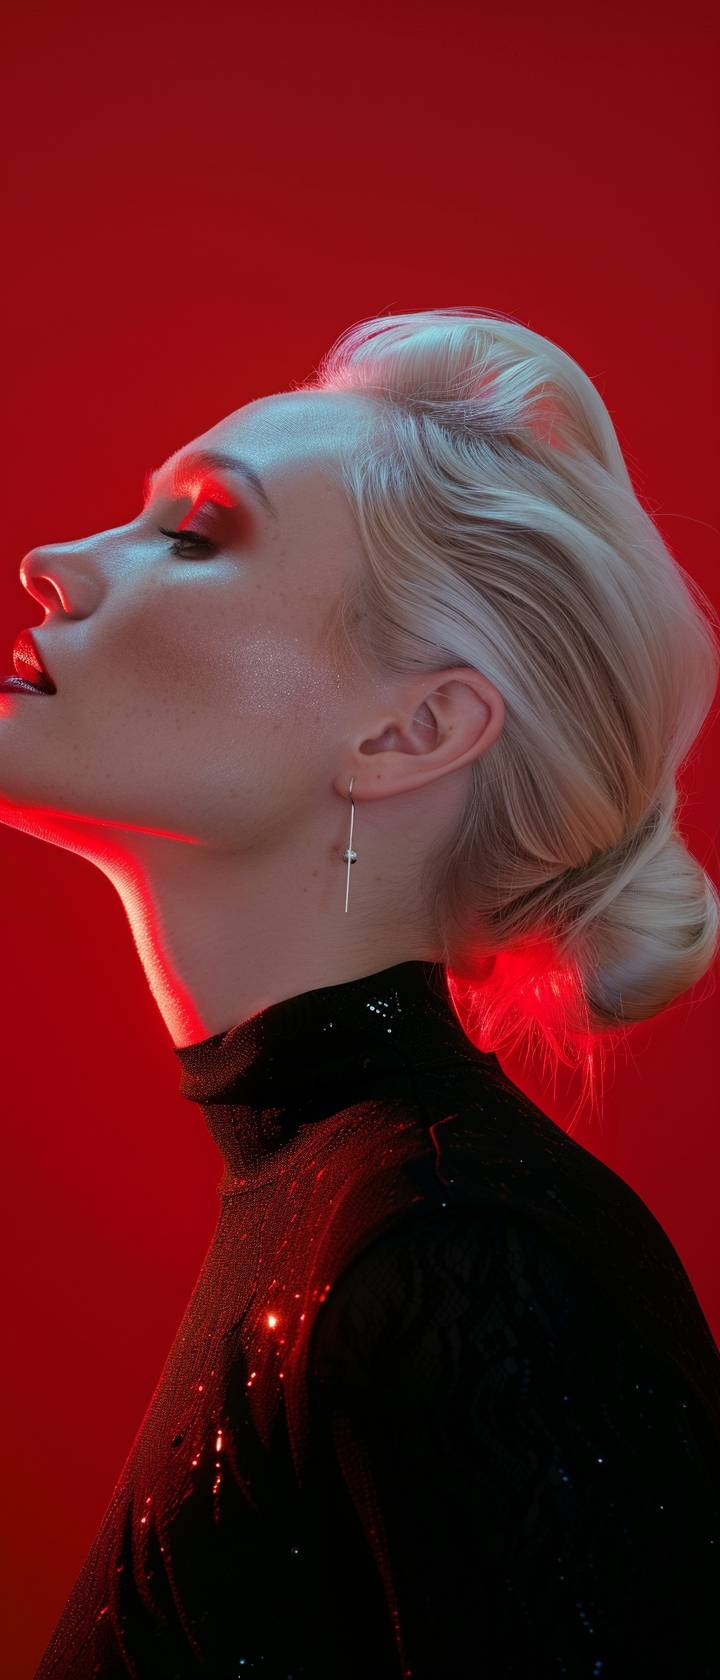 A side profile shot of a model with platinum blonde hair, illuminated by soft, white lighting against a vibrant red background. The makeup is minimal, emphasizing the model’s pale complexion and red lips. The overall effect is striking and minimalist, with a focus on the contrast between the red background and the model’s pale skin.